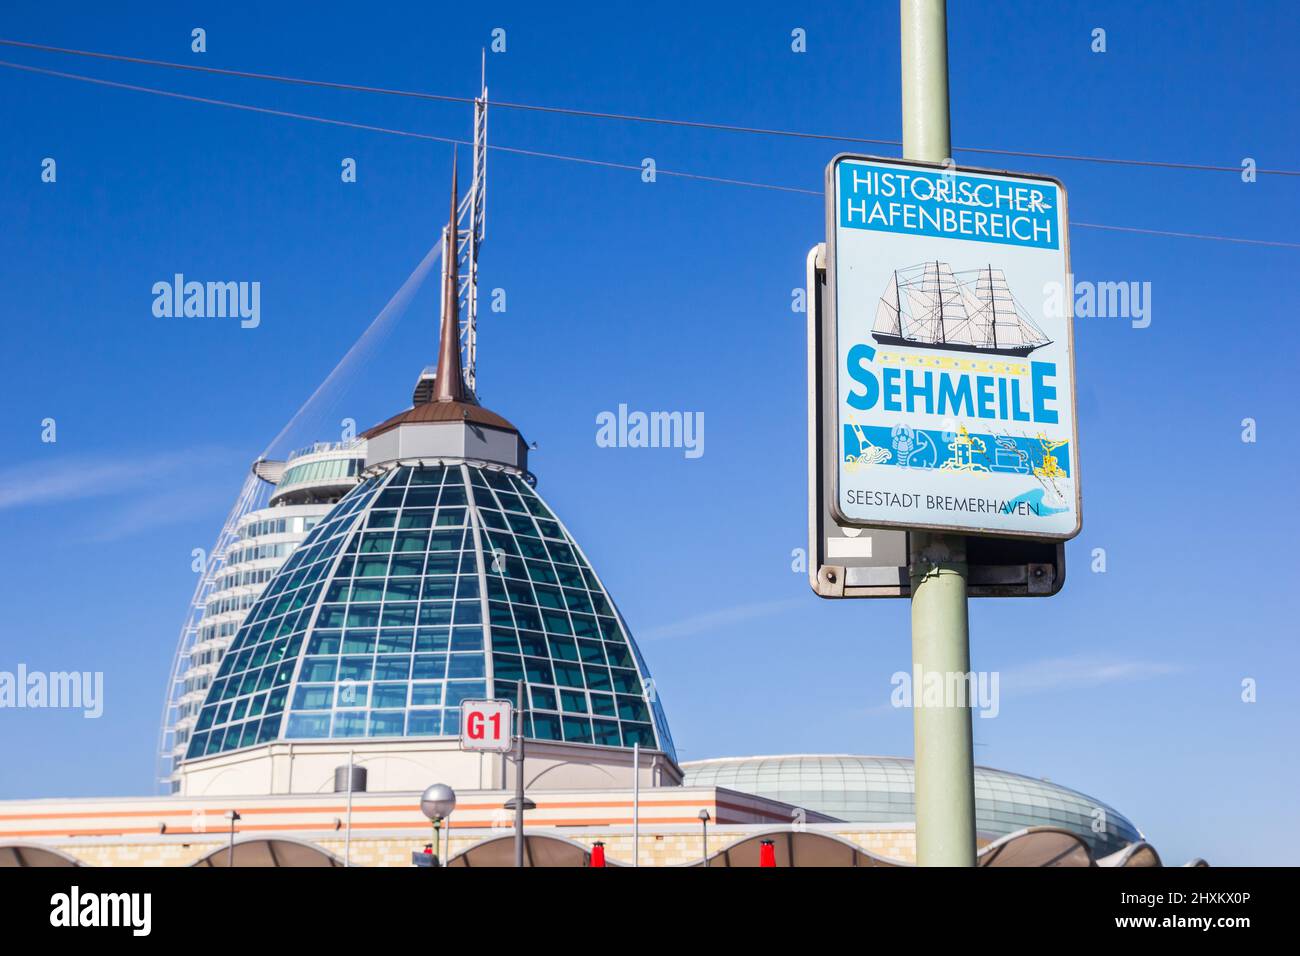 Tourist sign in the historic harbor of Bremerhaven, Germany Stock Photo